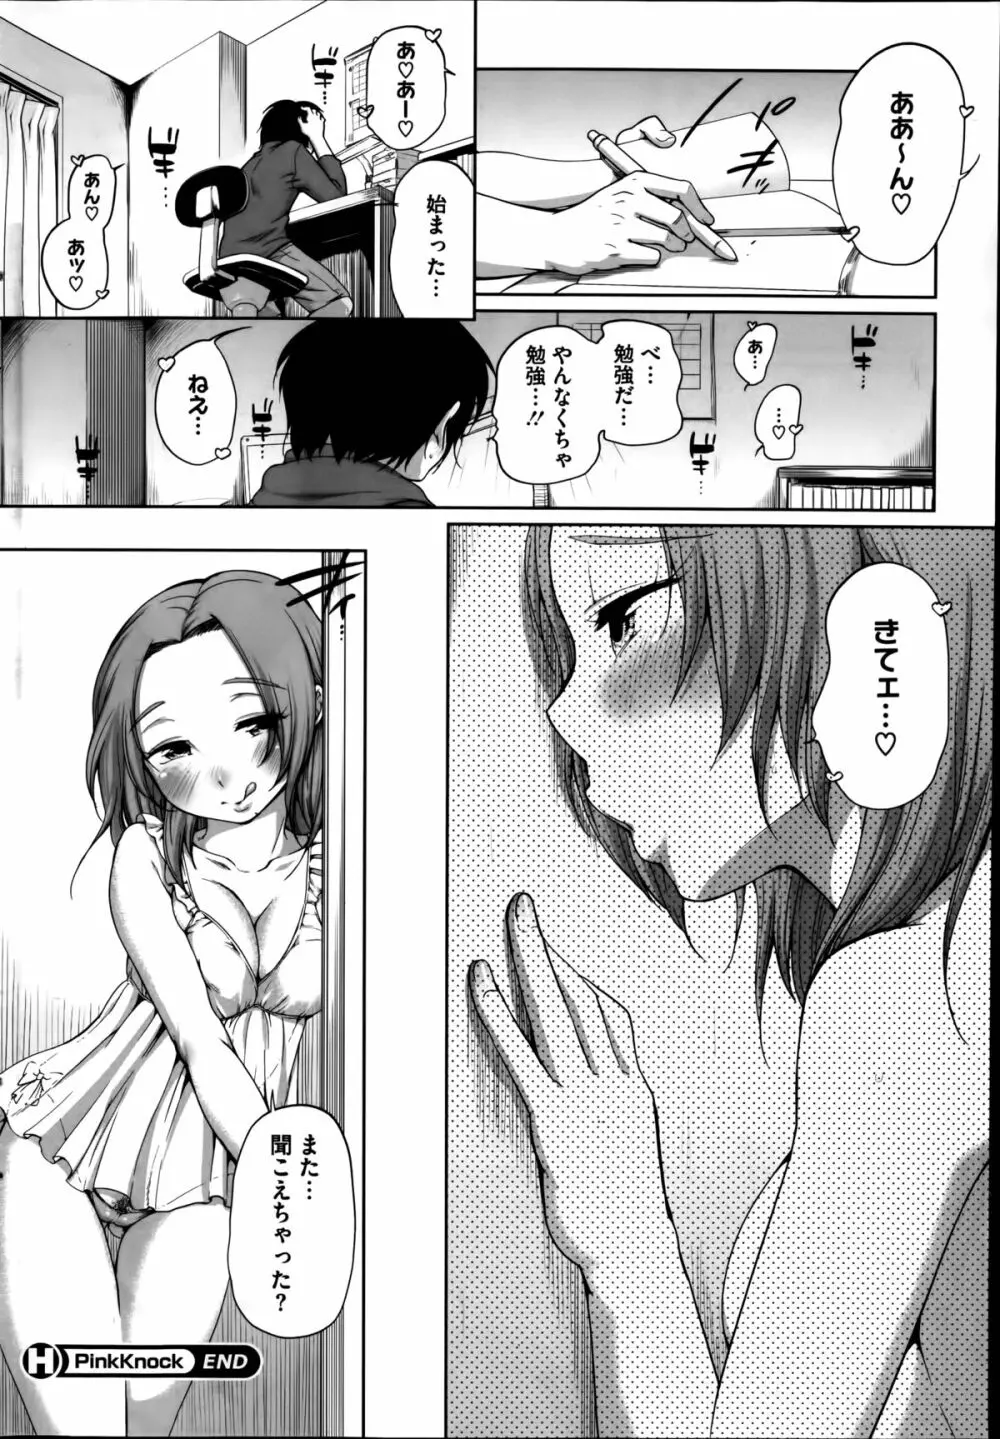 PinkKnock 第1-3章 Page.18